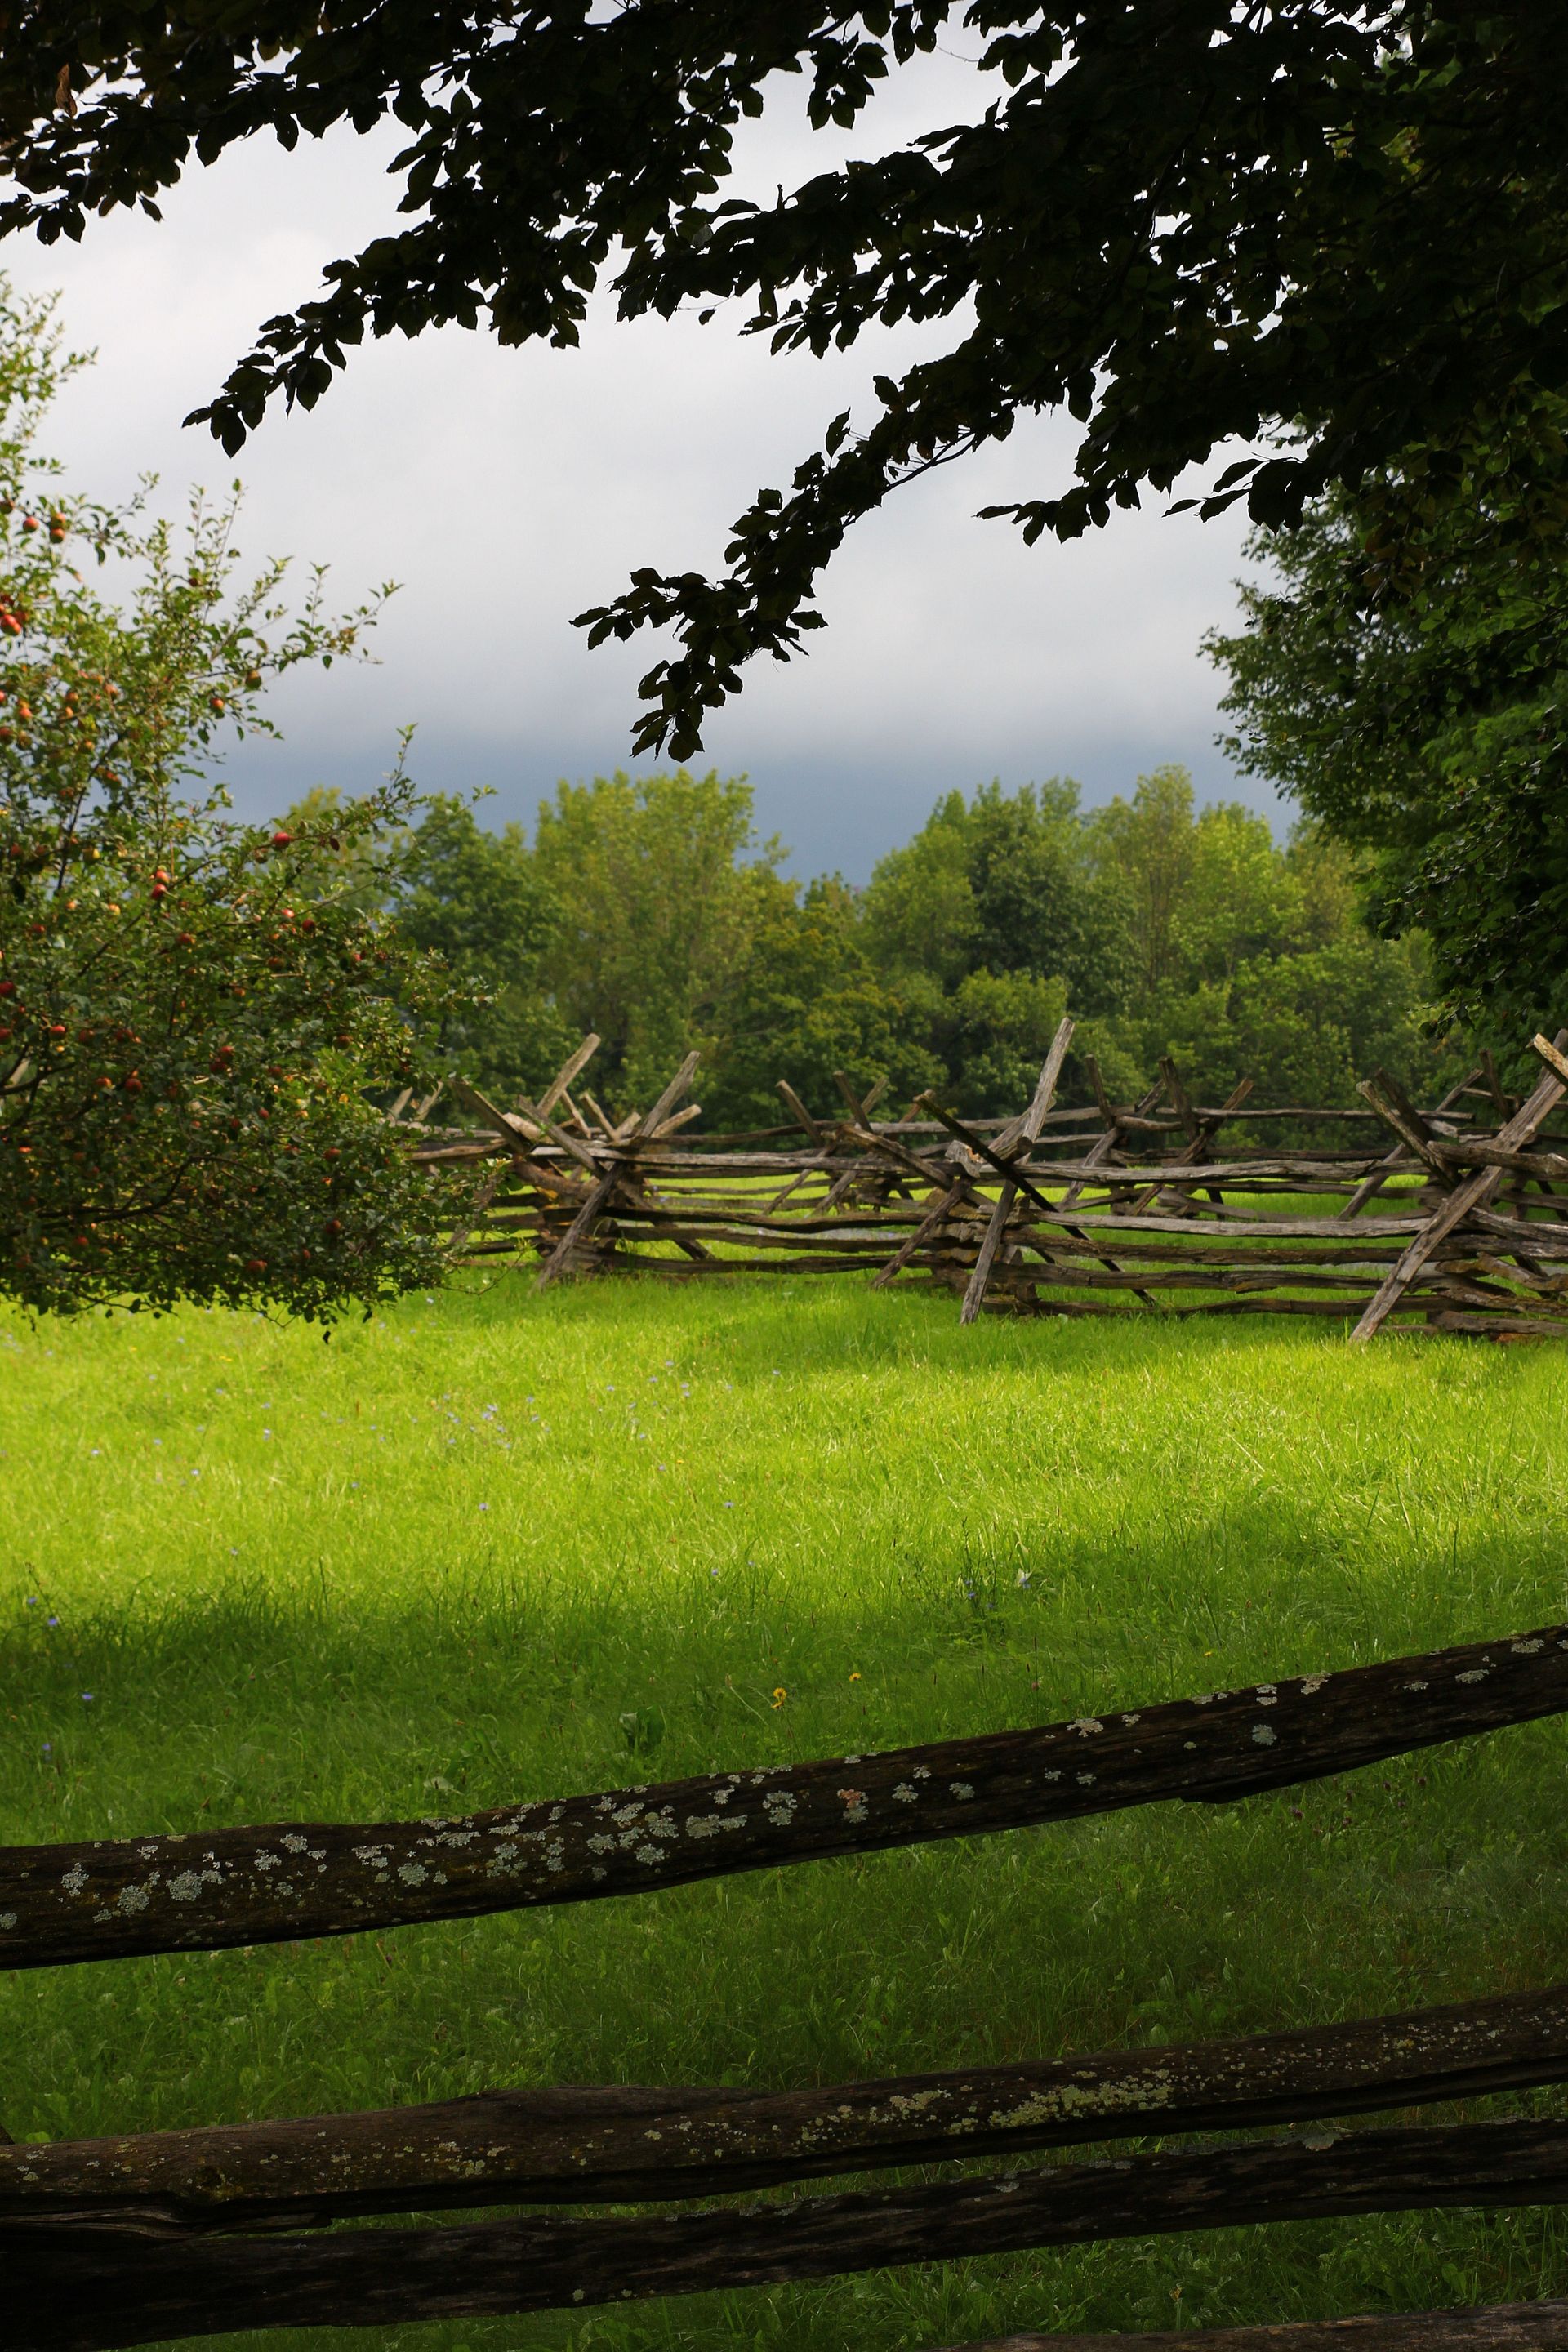 A fenced-in pasture in New York.